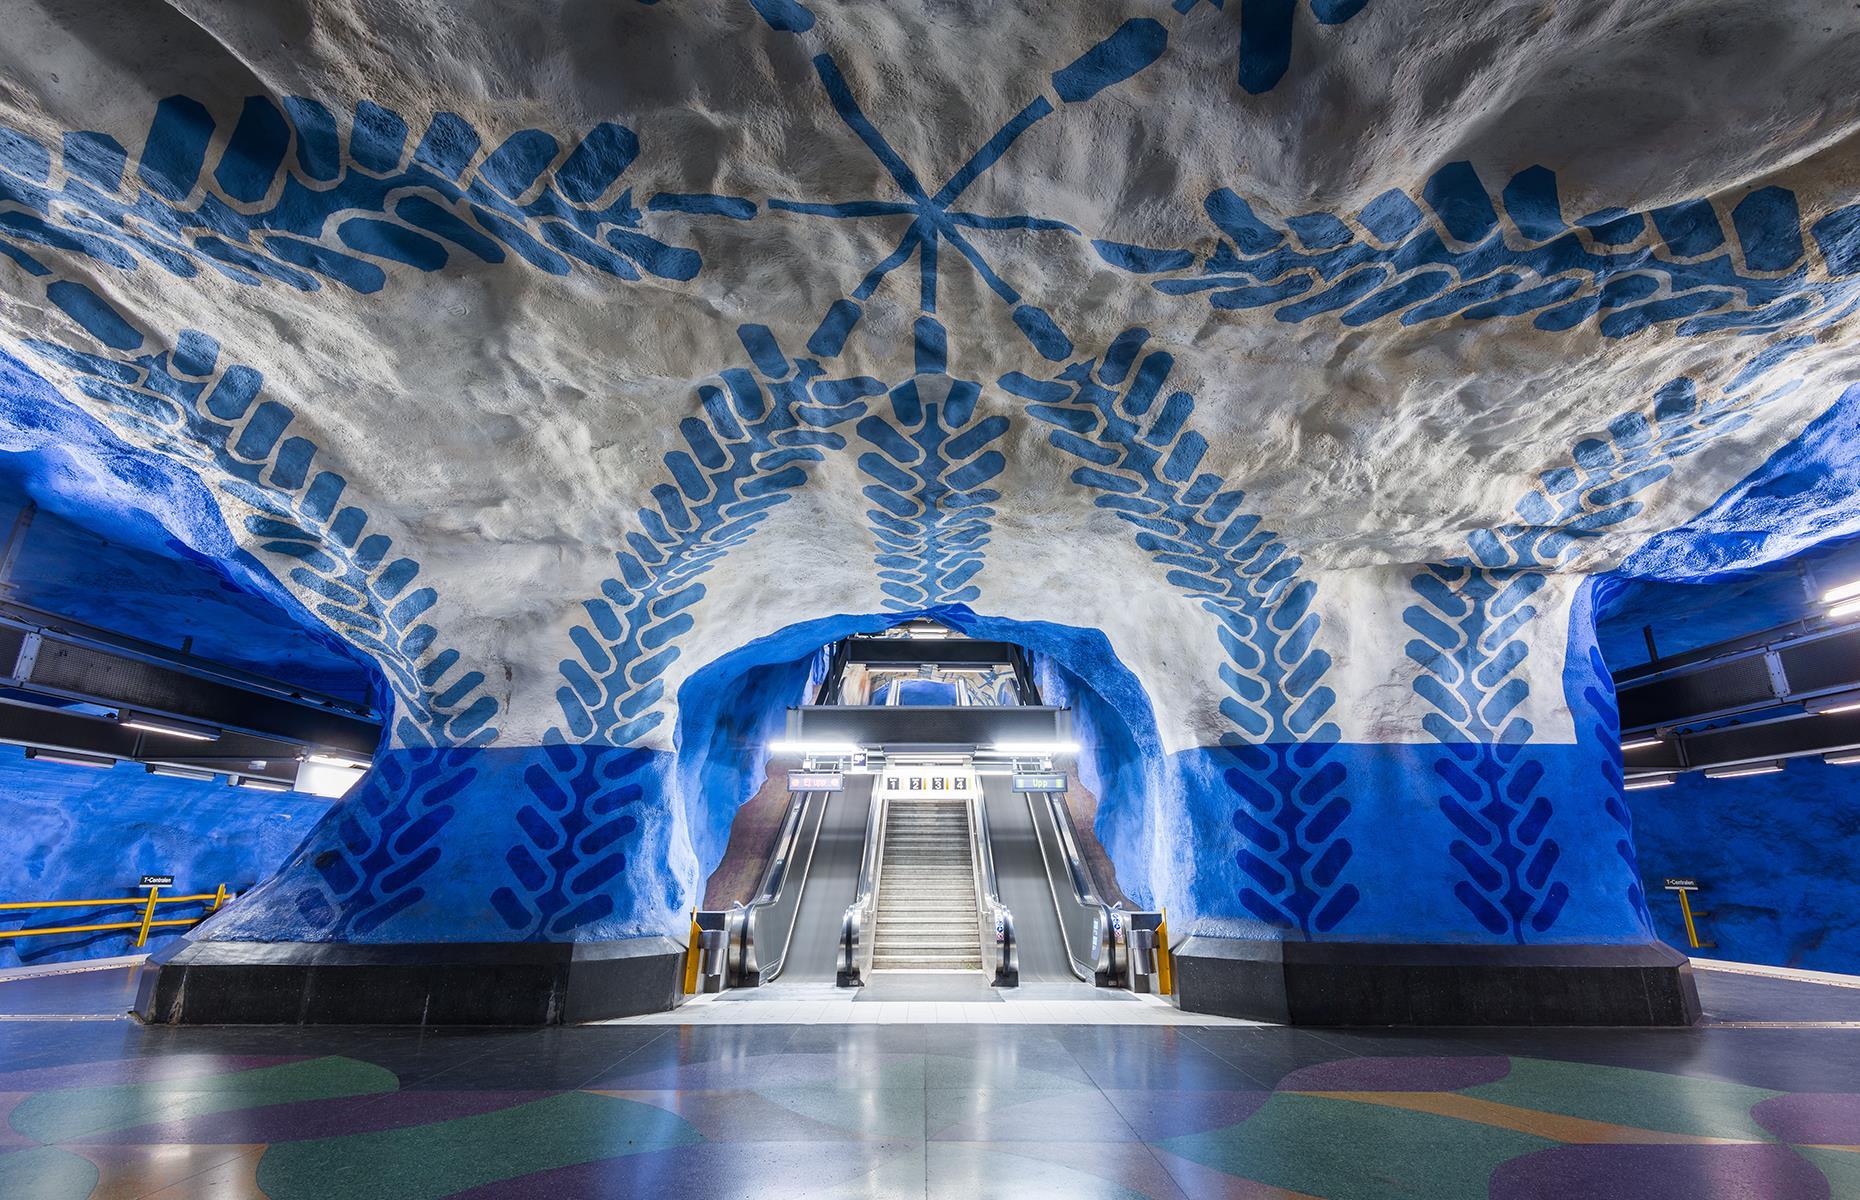 Stockholm’s Centralen station, where all the metro lines converge, is perhaps the most recognizable of all. Blue vines climb up the white-washed grotto ceiling at platform level while red and green line platform walls above are decorated with colorful glass tiles.